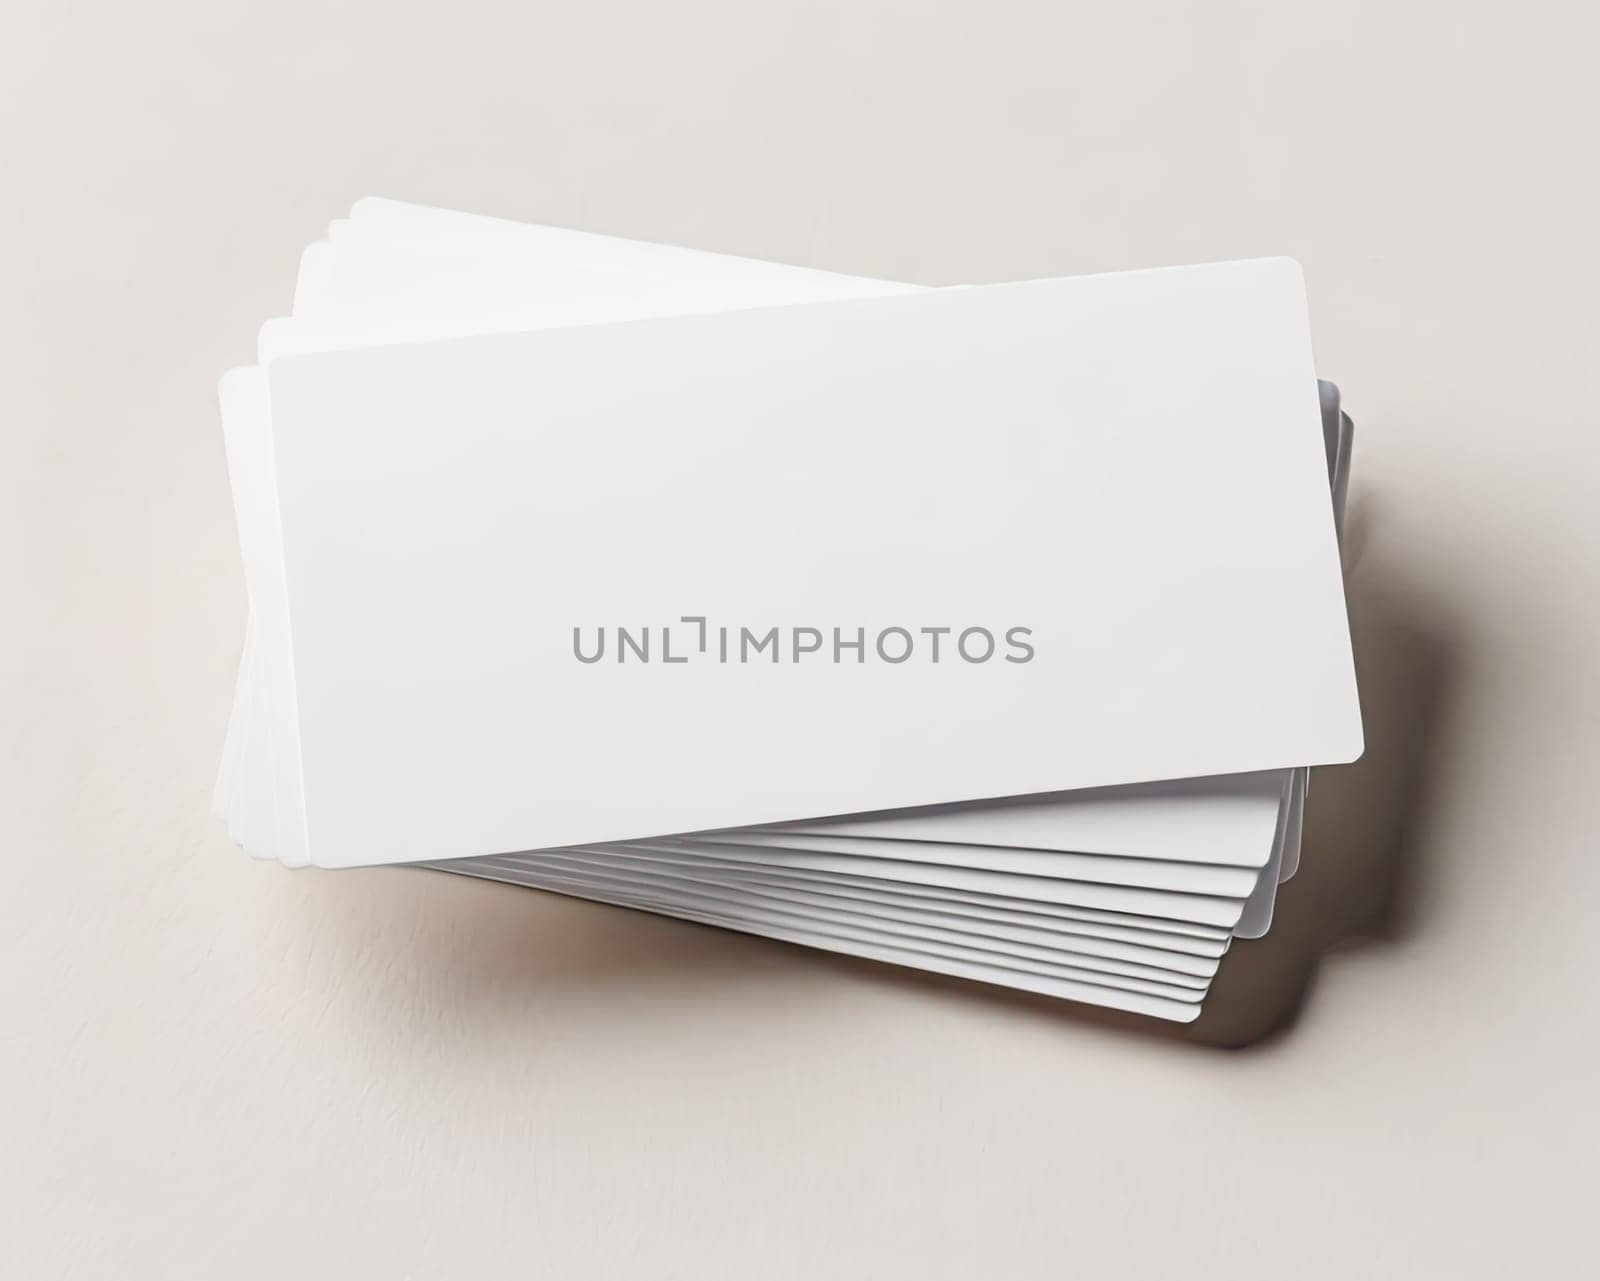 Mockup of business cards by Ladouski